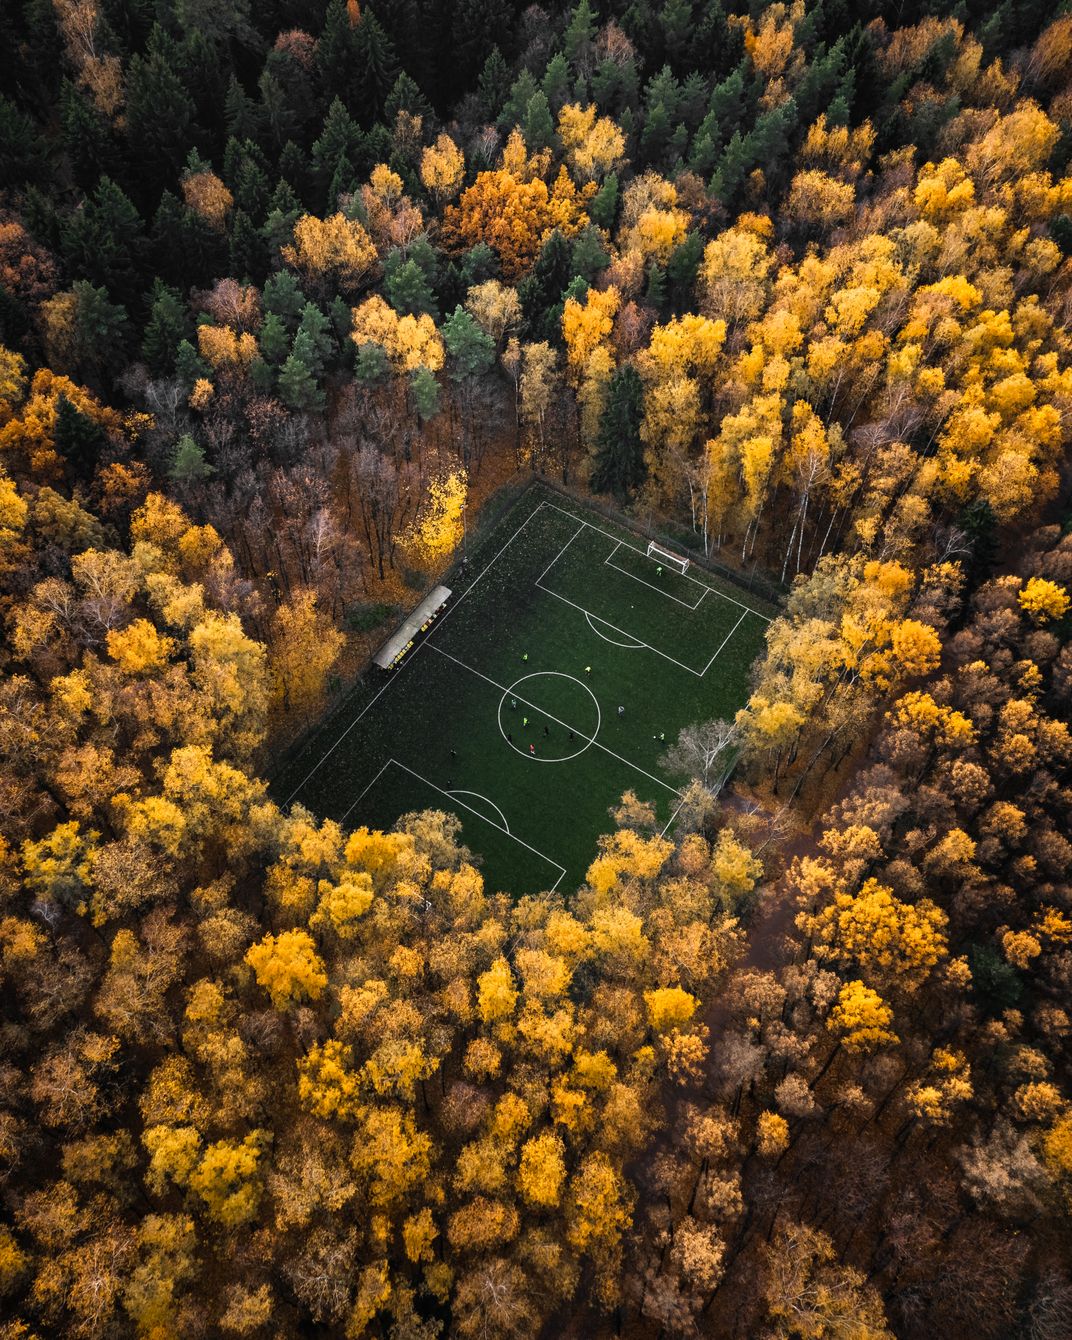 a soccer field surrounded by trees in the fall season